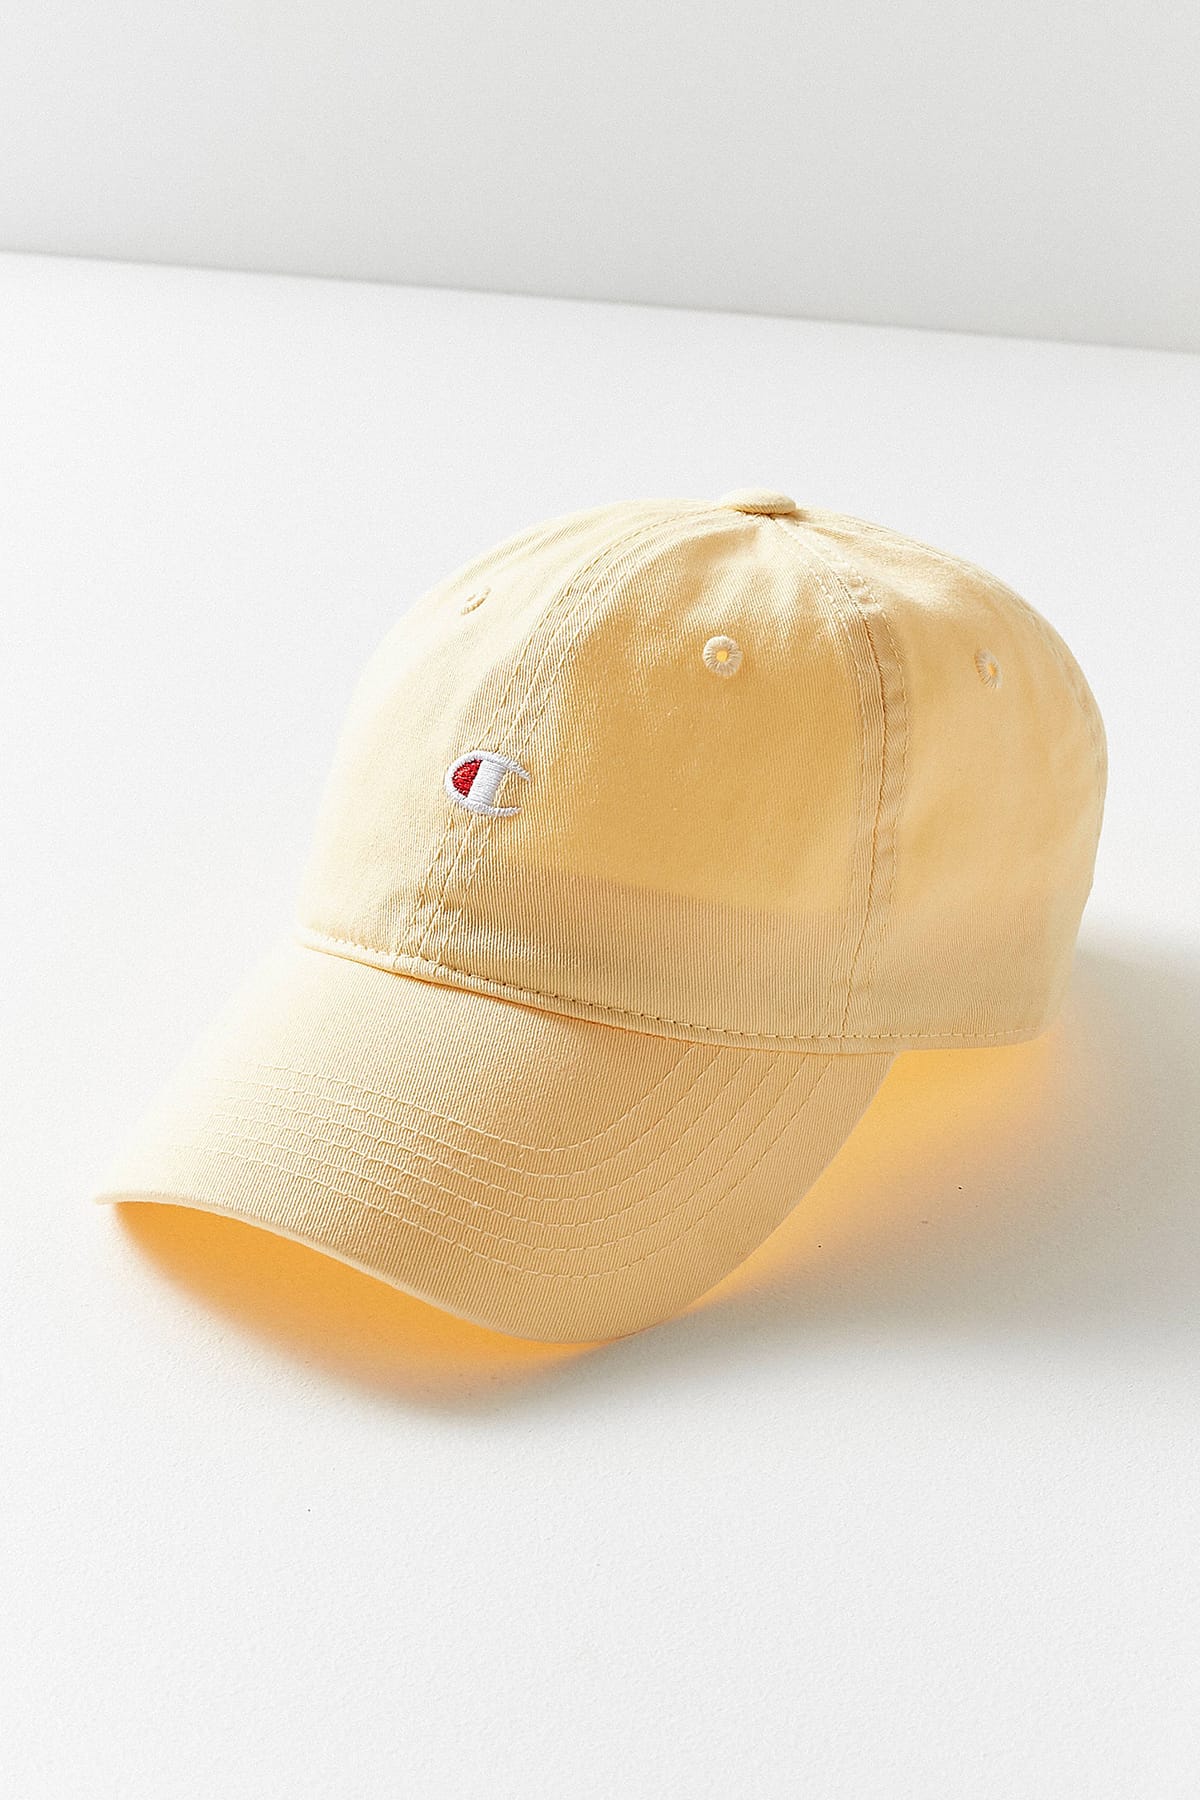 urban outfitters champion hat